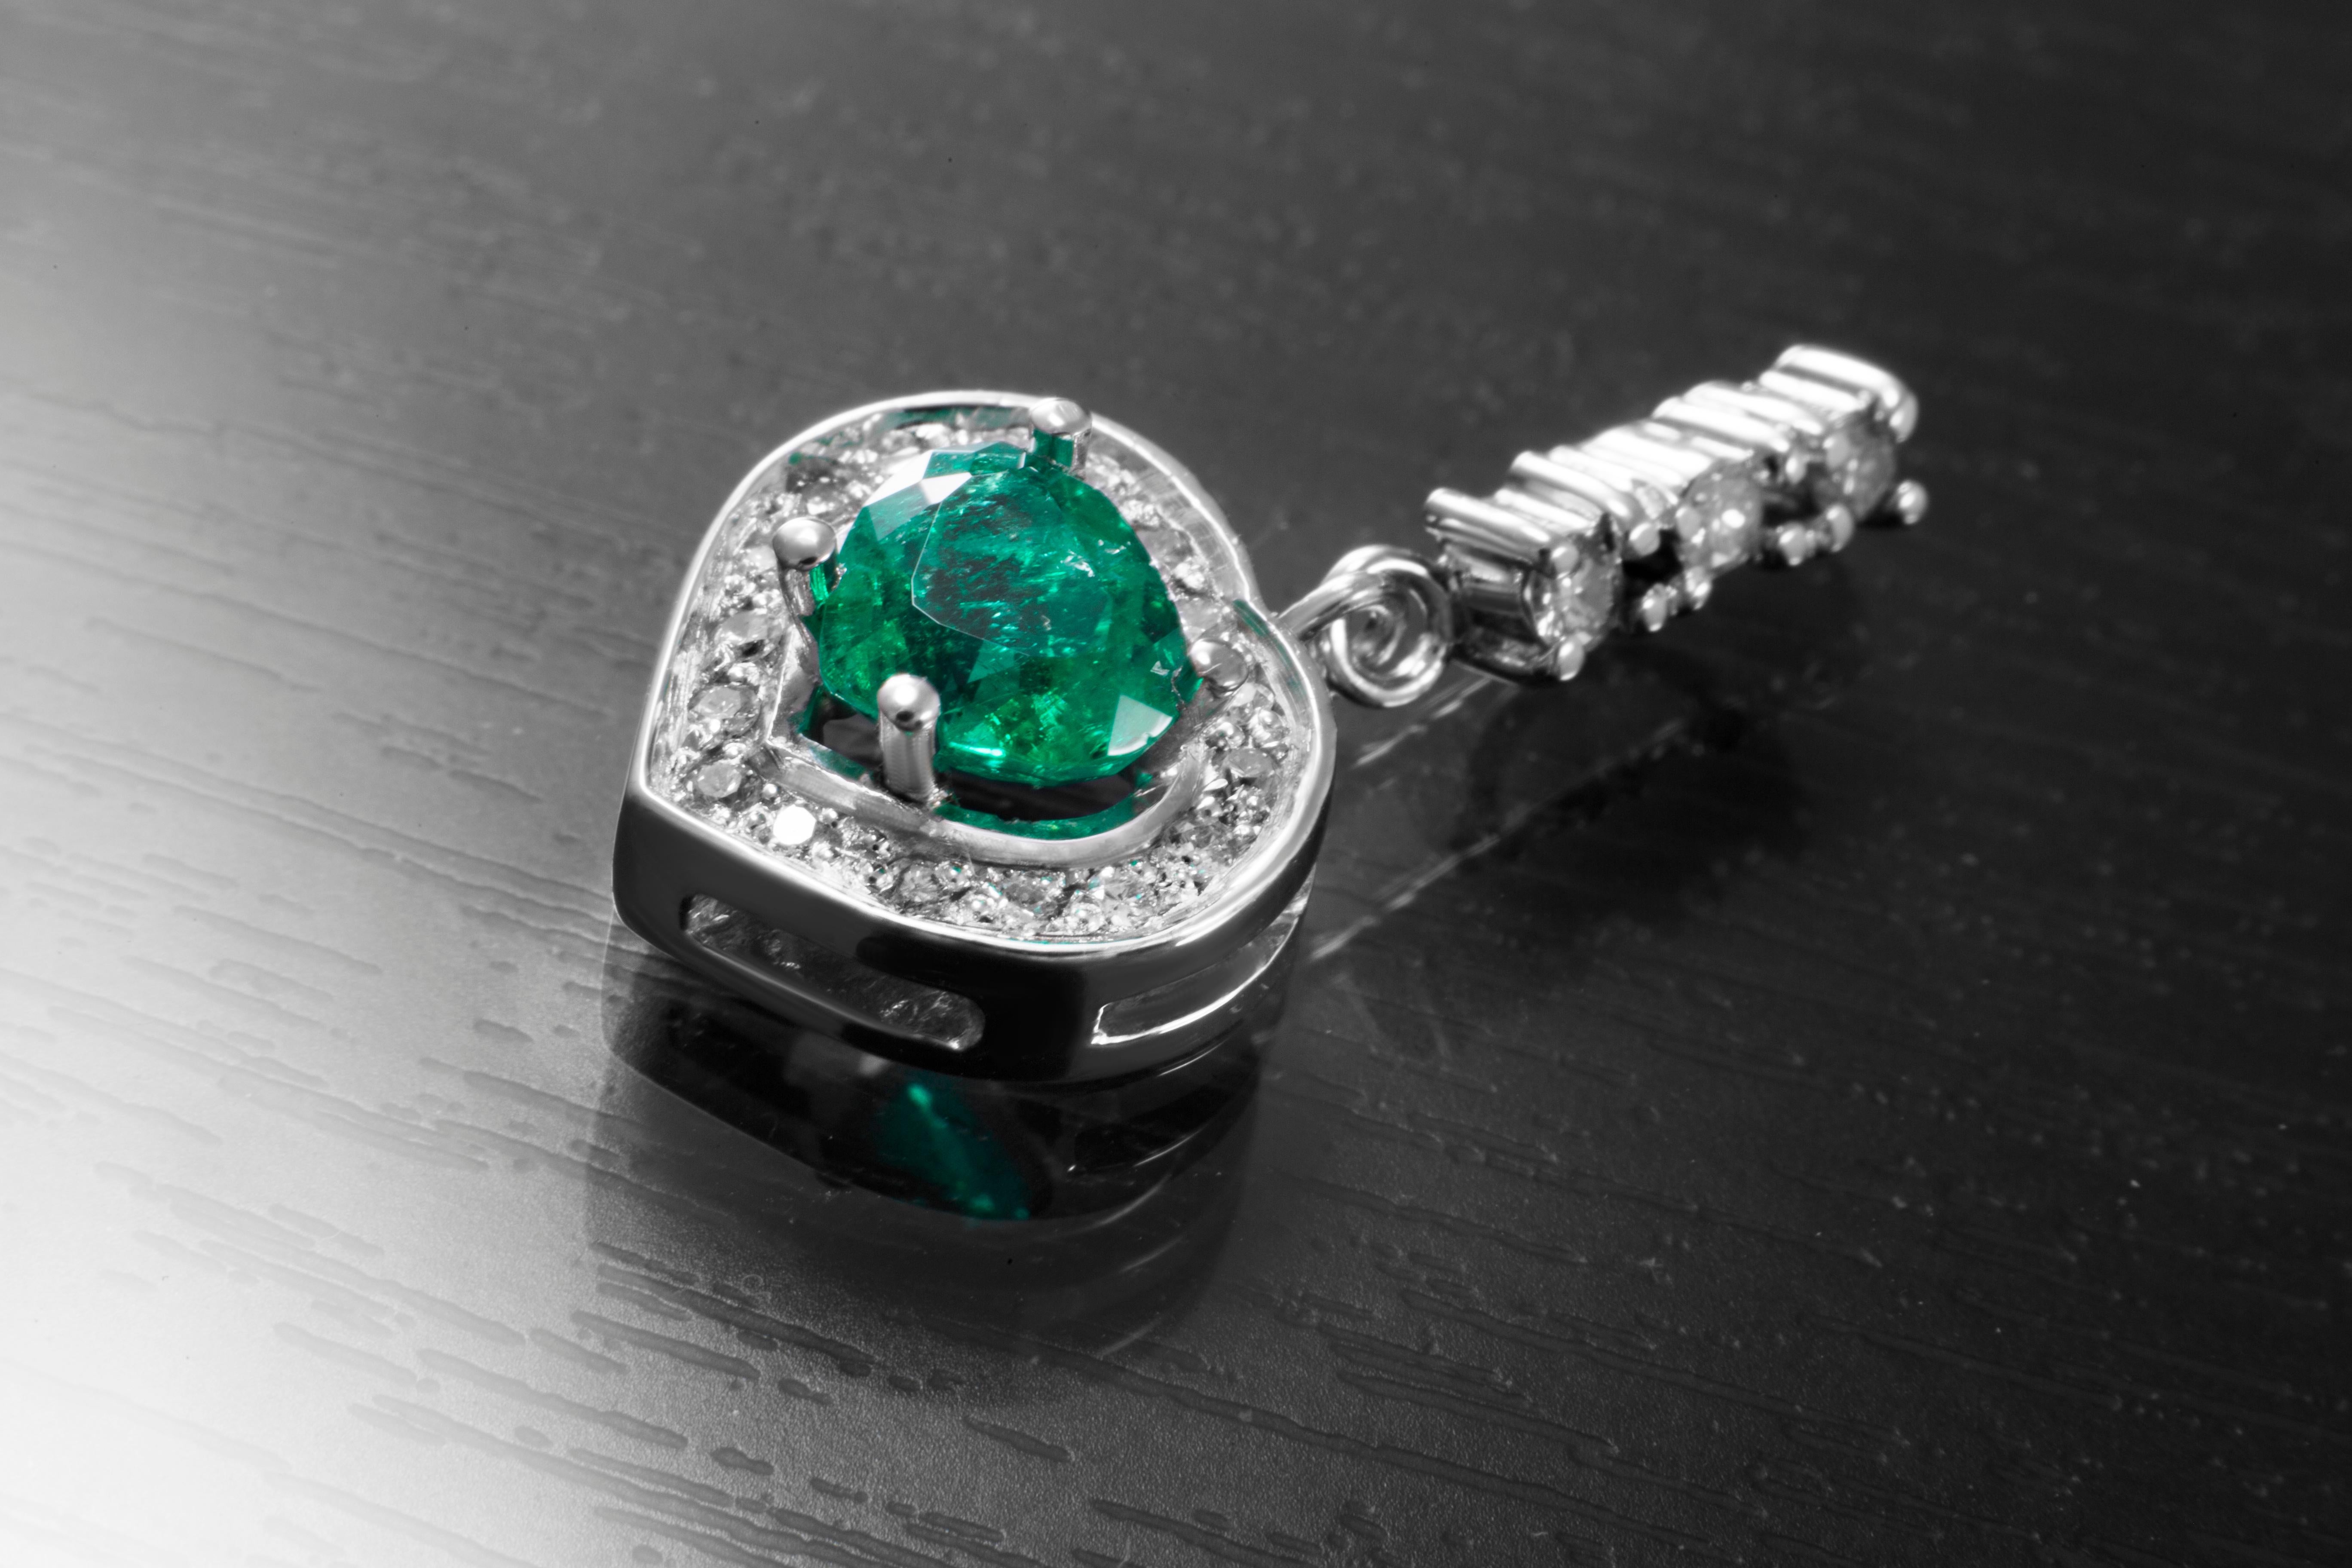 A pendant consisting of a 0.9 carat certified F3 quality Colombian Muzo emerald set in 18 carat white gold with a diamond melee, comprising 3 larger stones, of 0.09 carats, I-J colour and 17 smaller diamonds, totalling 0.17 carats, I-J